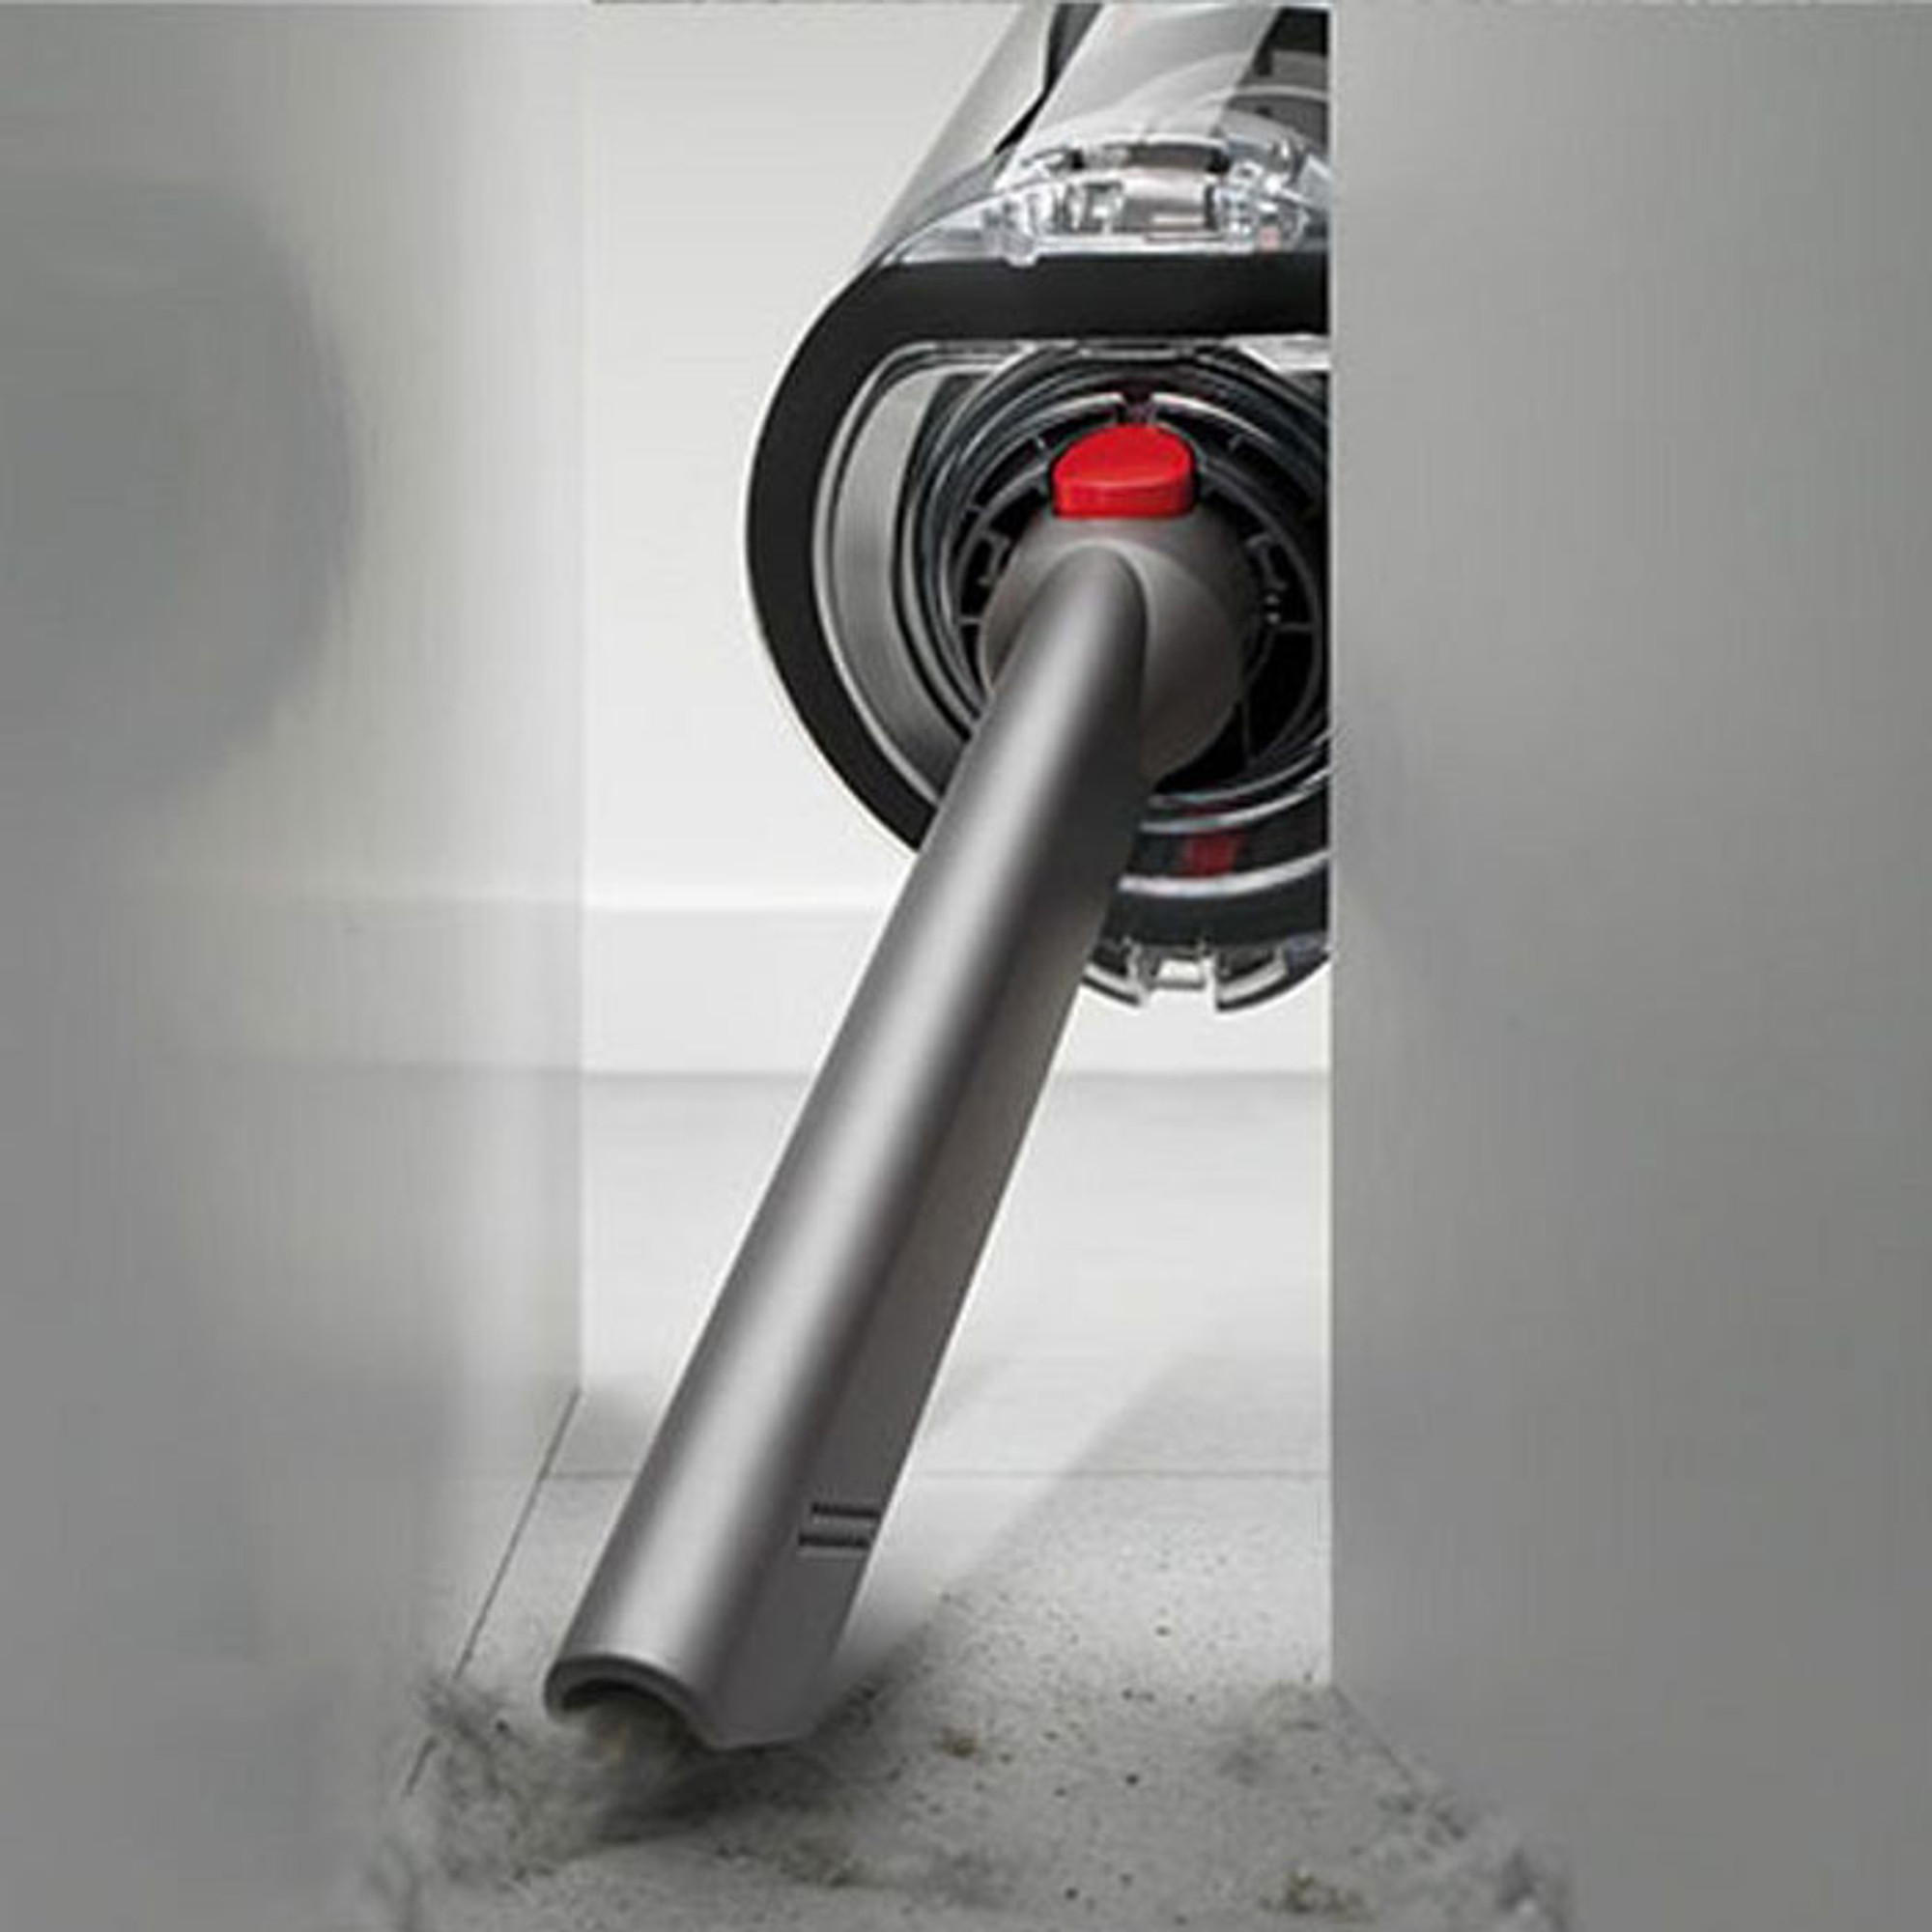 Buy Dyson Cyclone V10 Animal Cordless Vacuum from Canada